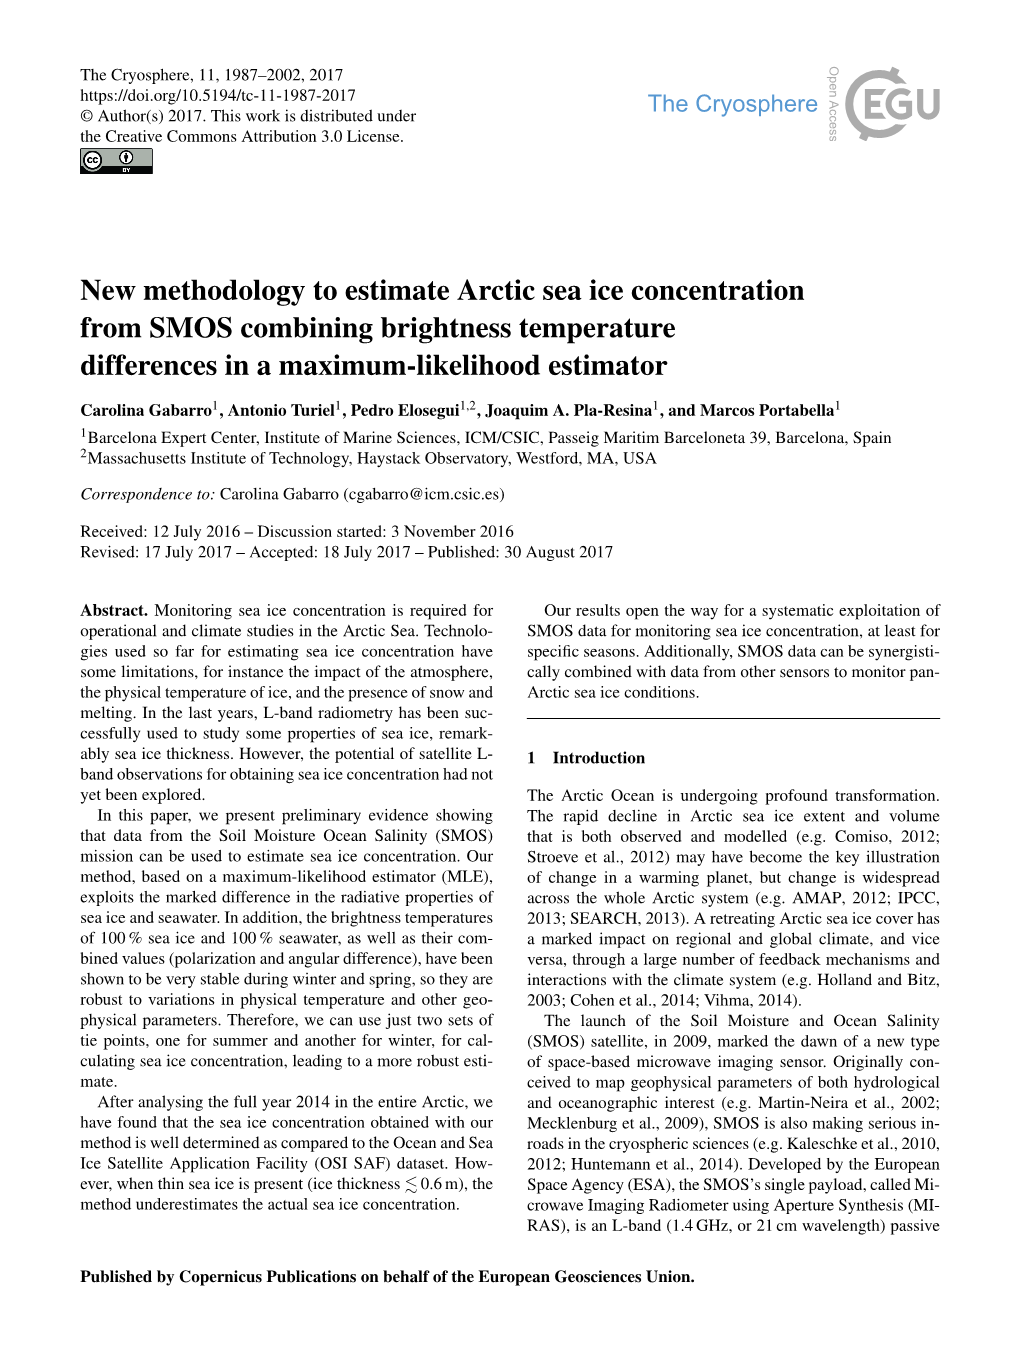 New Methodology to Estimate Arctic Sea Ice Concentration from SMOS Combining Brightness Temperature Differences in a Maximum-Likelihood Estimator